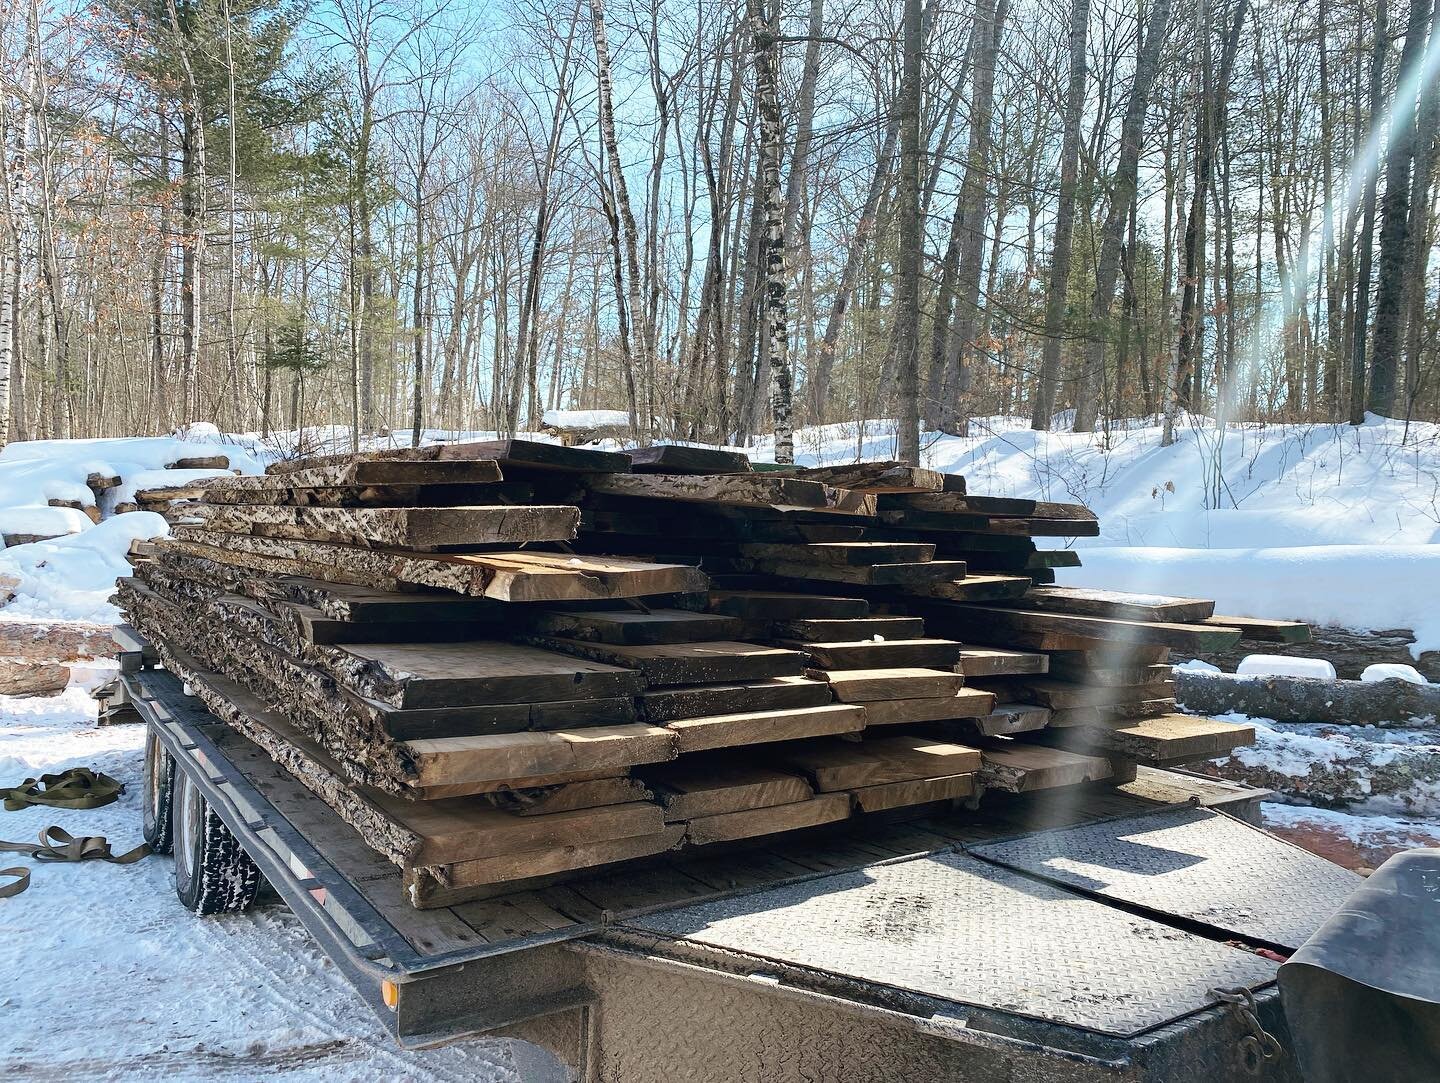 16&rsquo; live edge rare butternut slabs coming soon 🤘

&bull;
&bull;
&bull;
#rusticfurniture #durhamwoodworking #kawarthalakescarpentry
 #woodworking #bowmanville #woodsiding #woodmizer #reclaimedwood #reclaimedwoodfurniture #woodprojects #carpentr